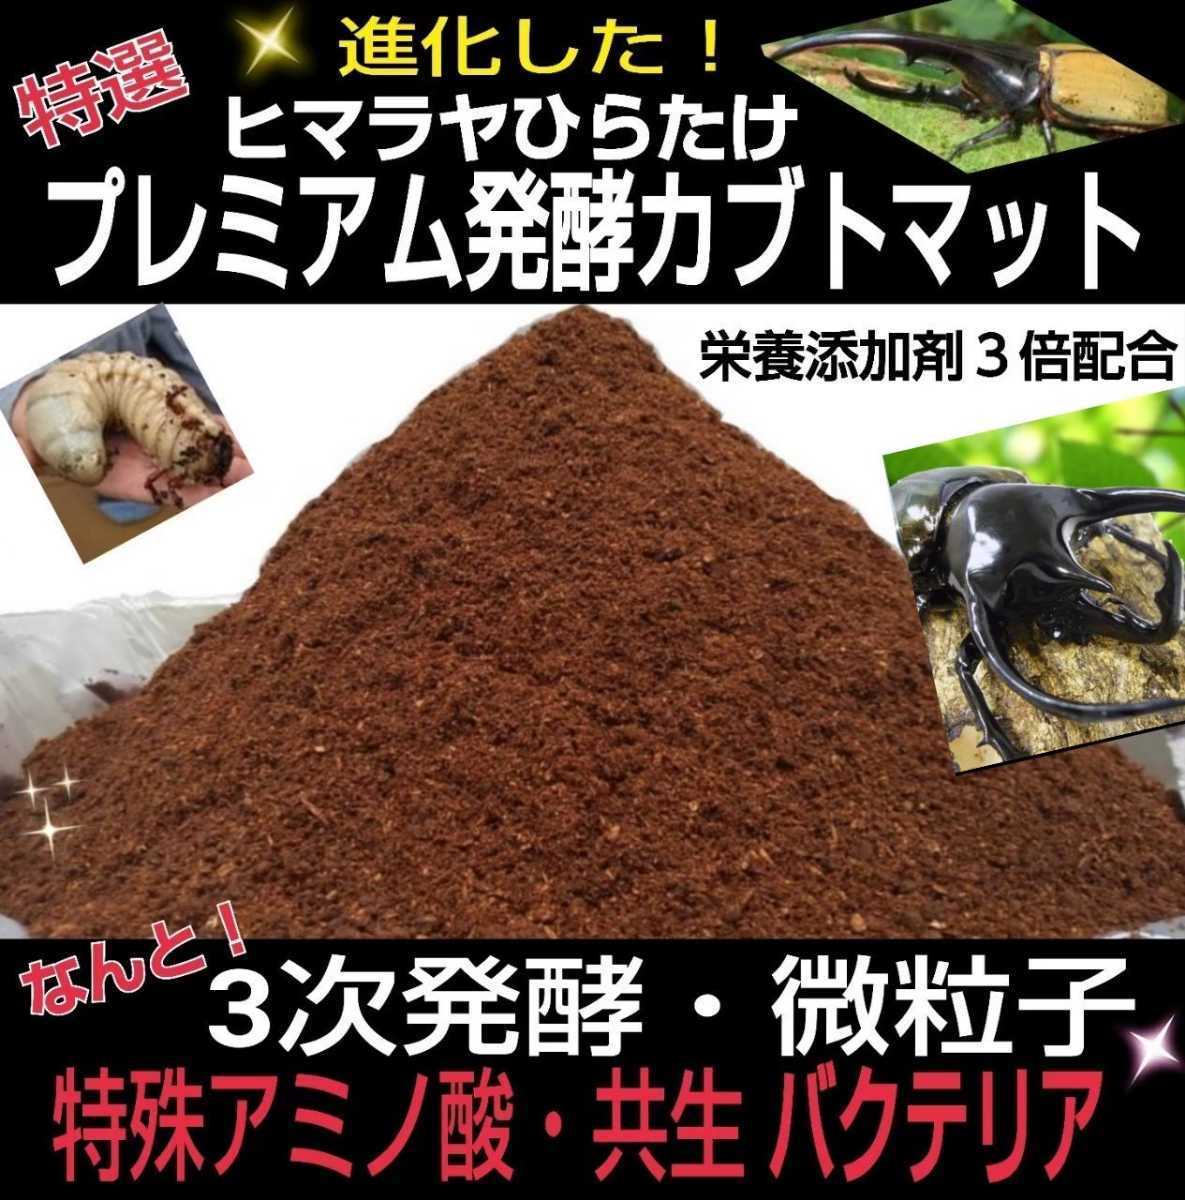  extra-large case attaching * premium departure . mat 20L entering * rhinoceros beetle larva . inserting only * convenience! large imago feather . is possible to do *kobae prevention special filter attaching 